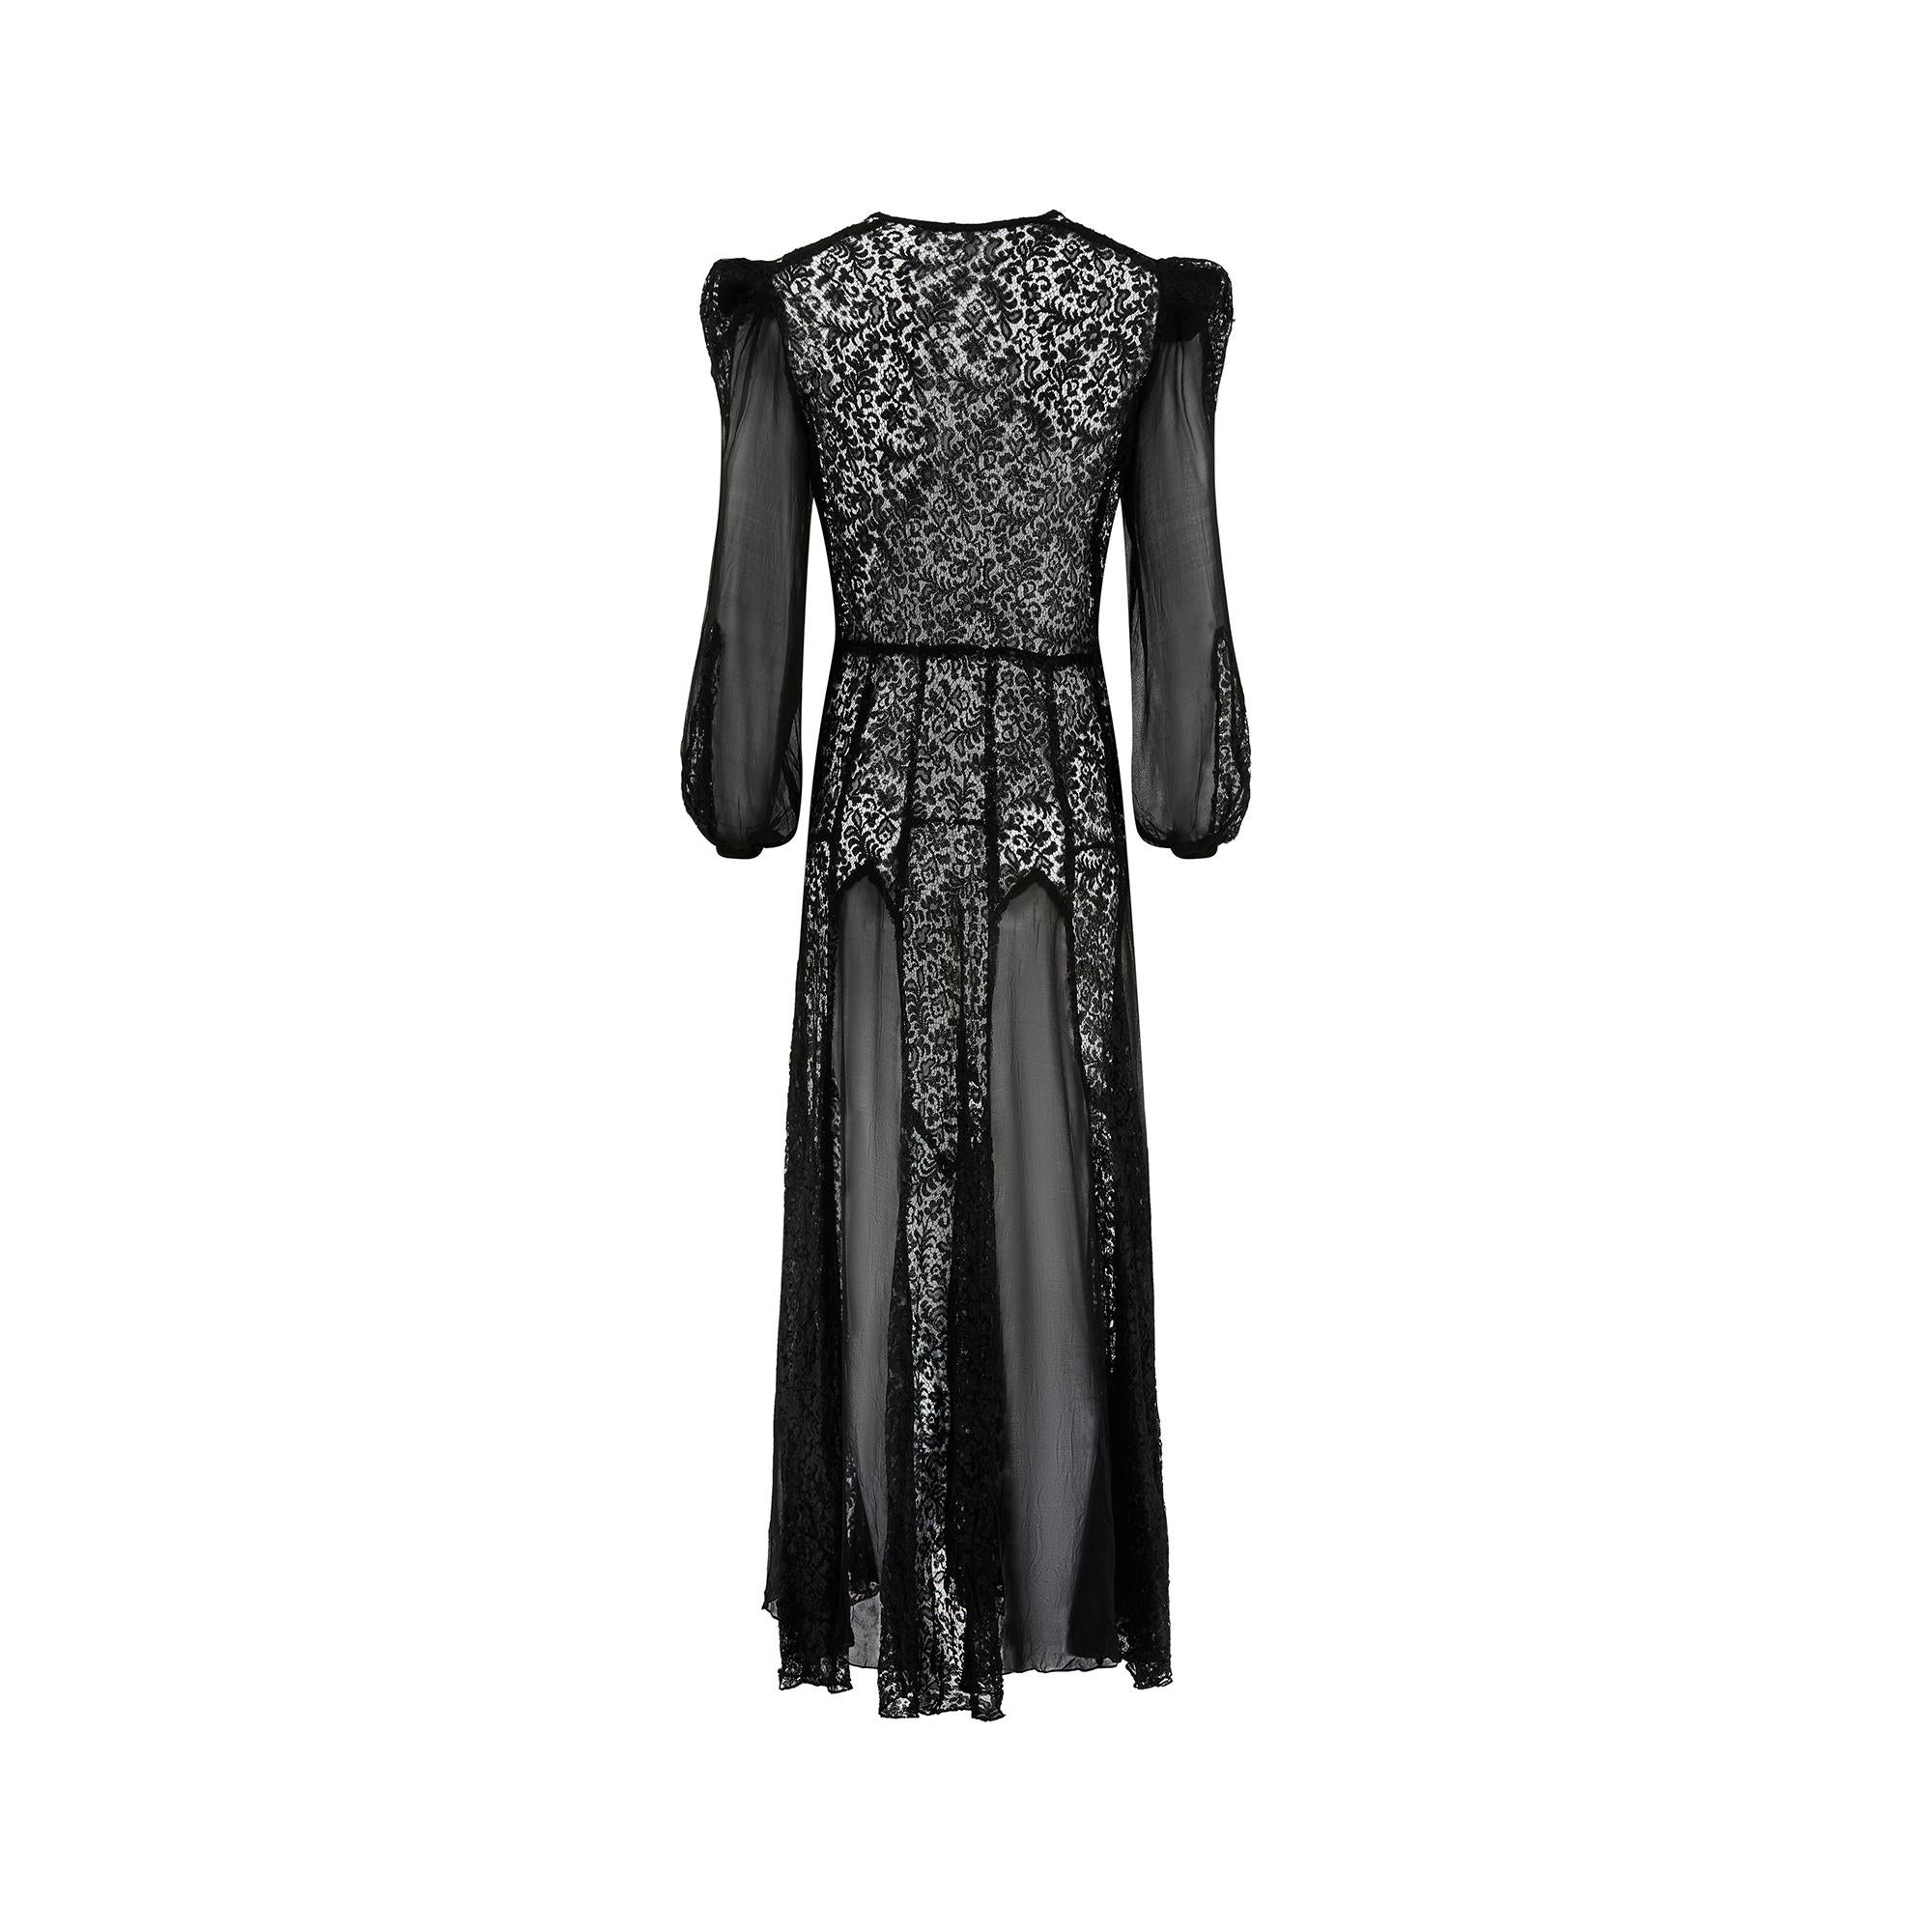 1930s Black Lace and Chiffon Insert Dress In Excellent Condition For Sale In London, GB